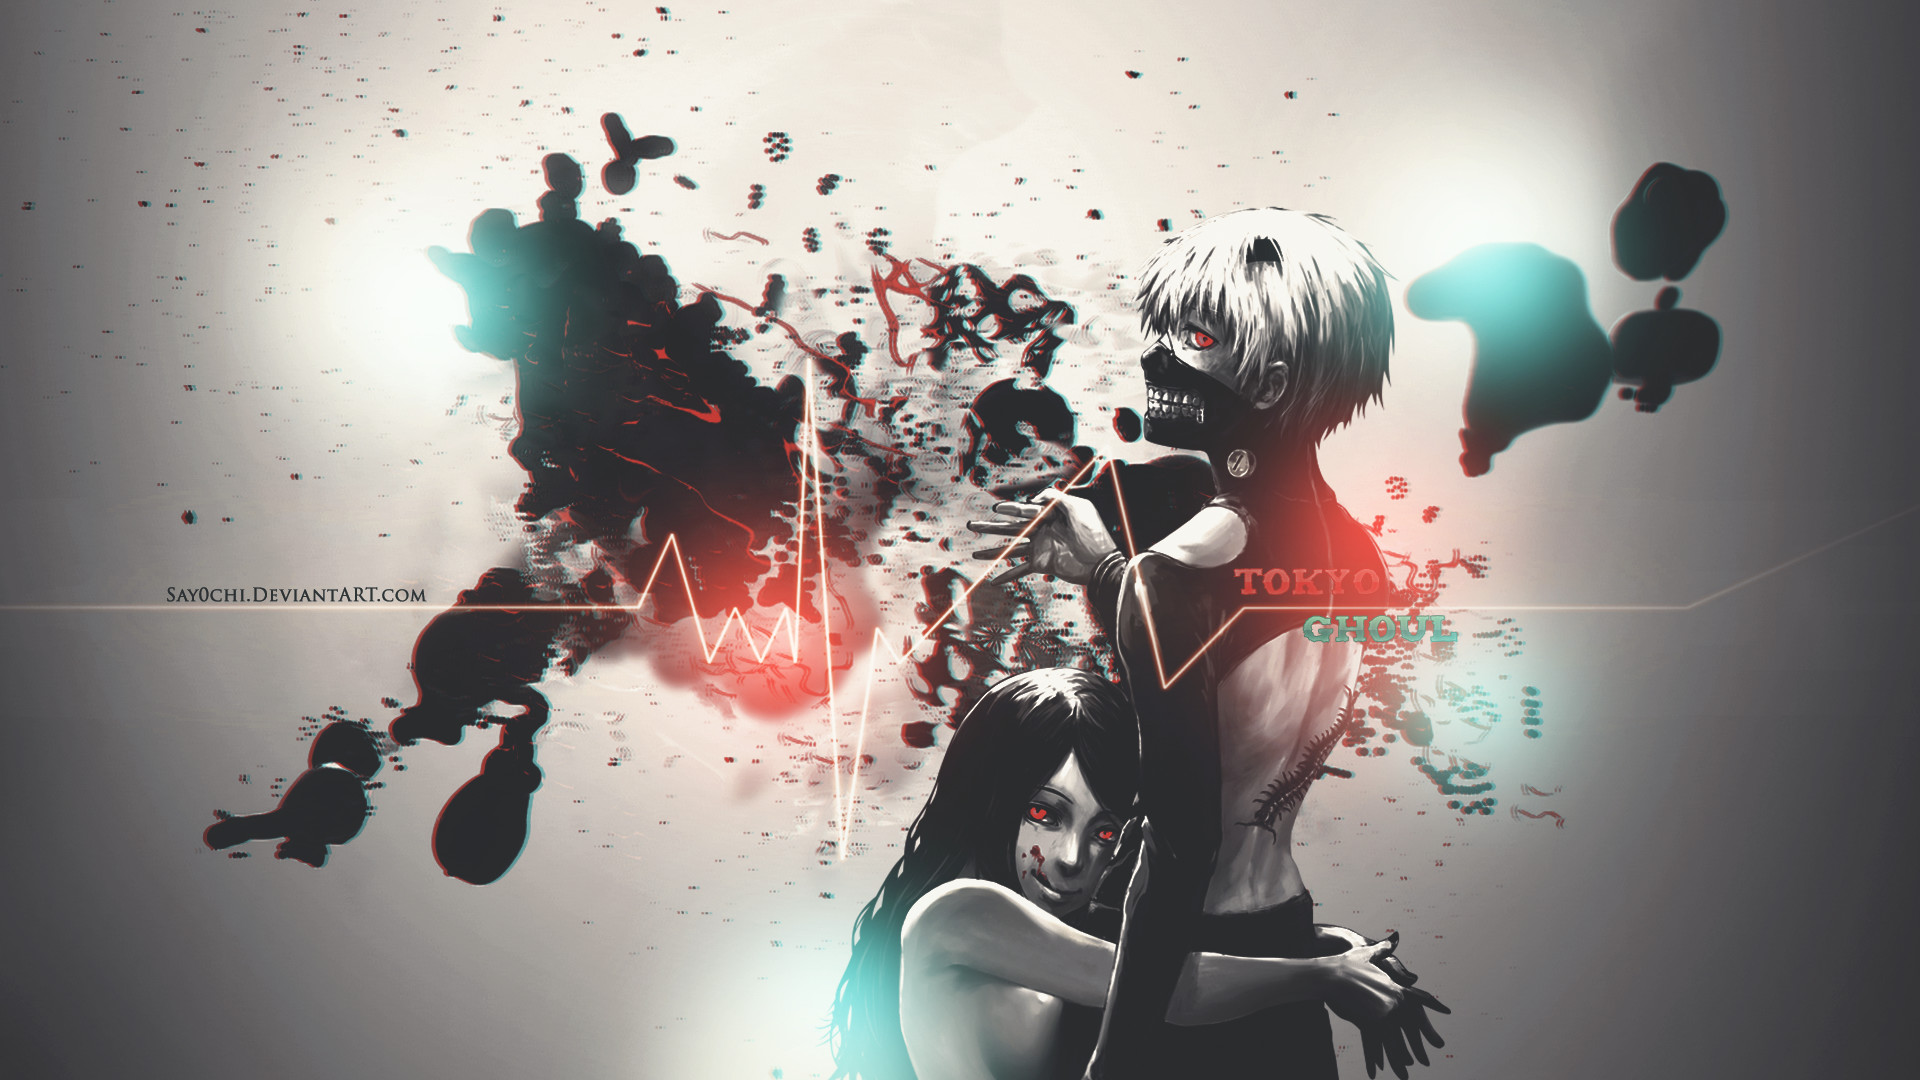 … Tokyo Ghoul Wallpaper 1920 x 1080 [HD] by Say0chi